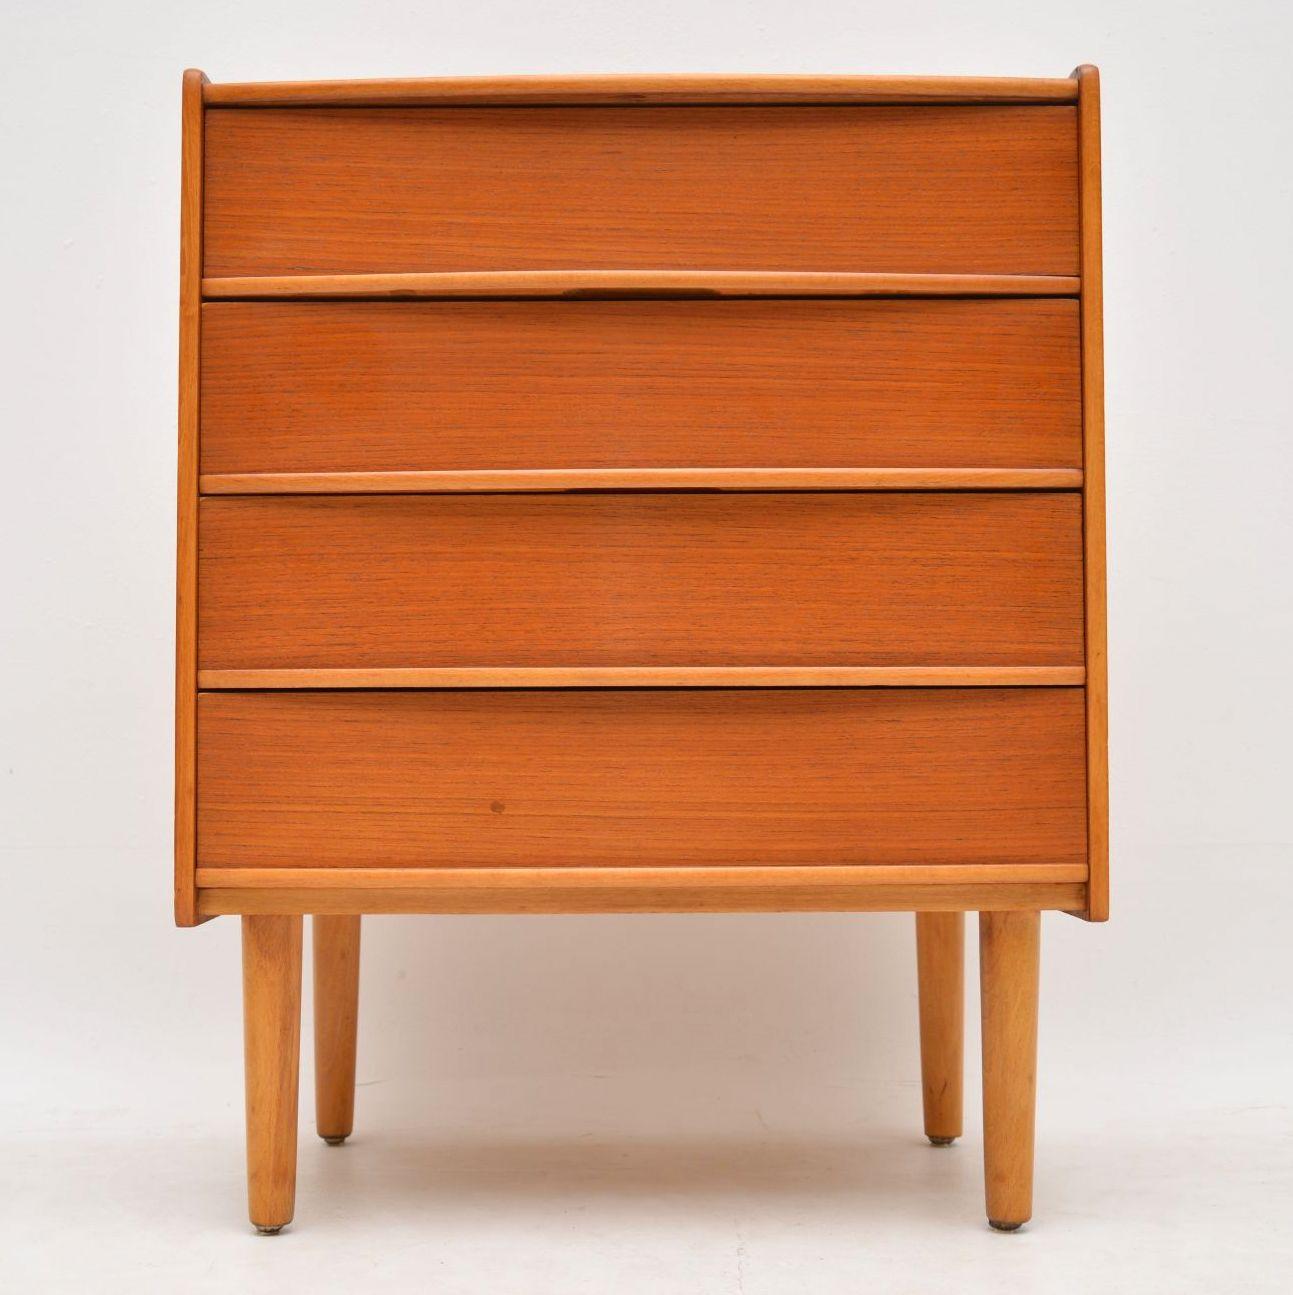 A beautiful little vintage teak chest of drawers, this was made in Norway around the 1960s, it was made by Skeie and co. The condition is excellent for it’s age, we have had this completely stripped and re-polished with some minor repairs to chipped